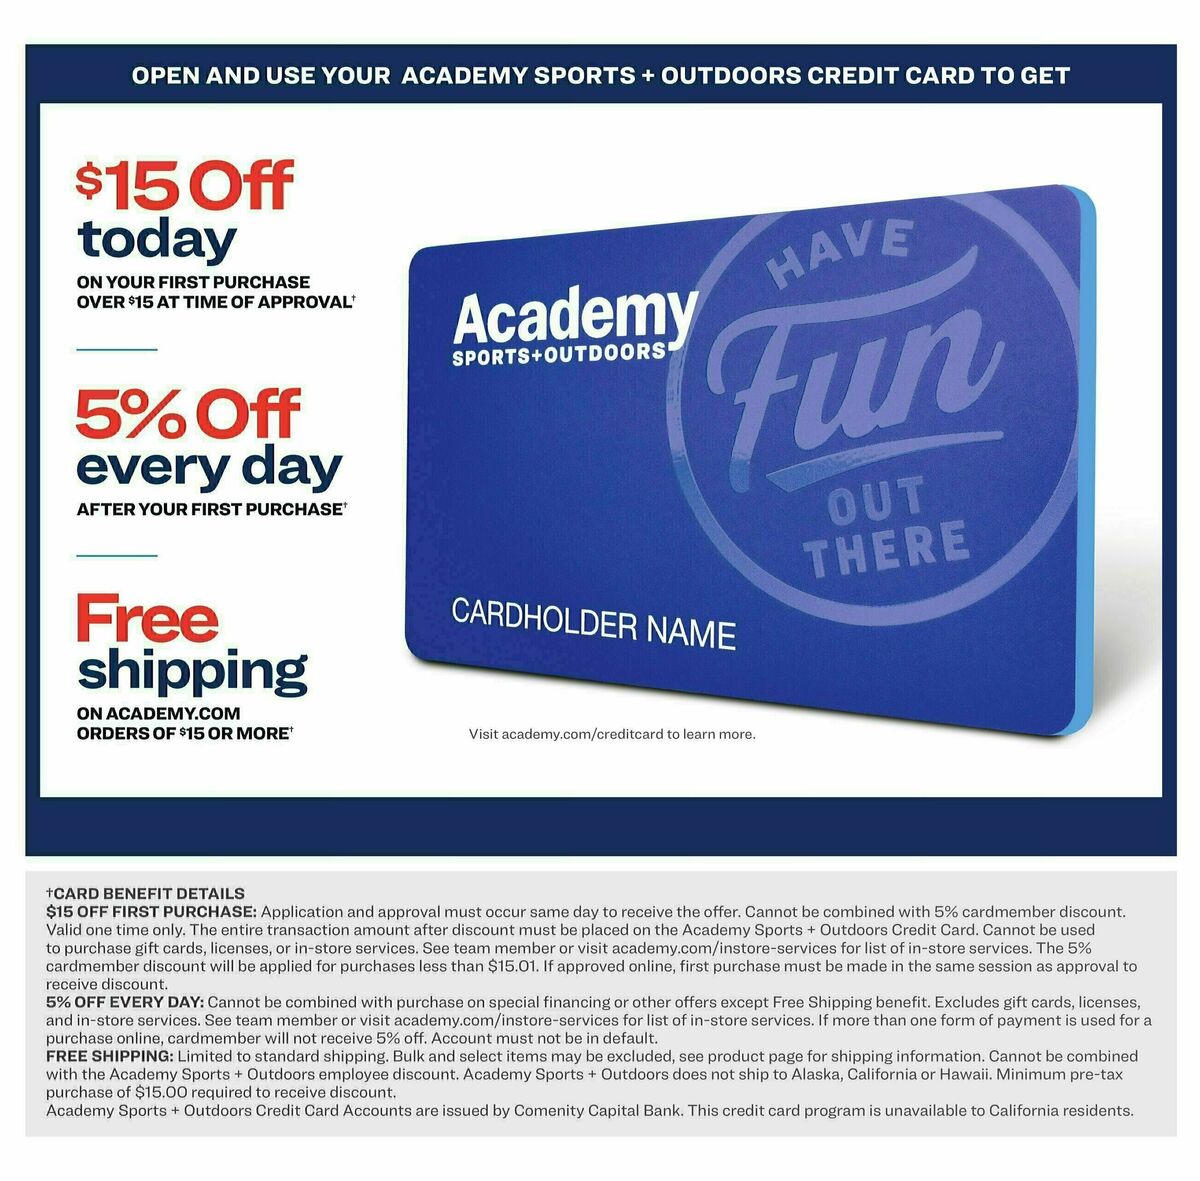 Academy Sports + Outdoors 4th of July Sale Weekly Ad from June 29